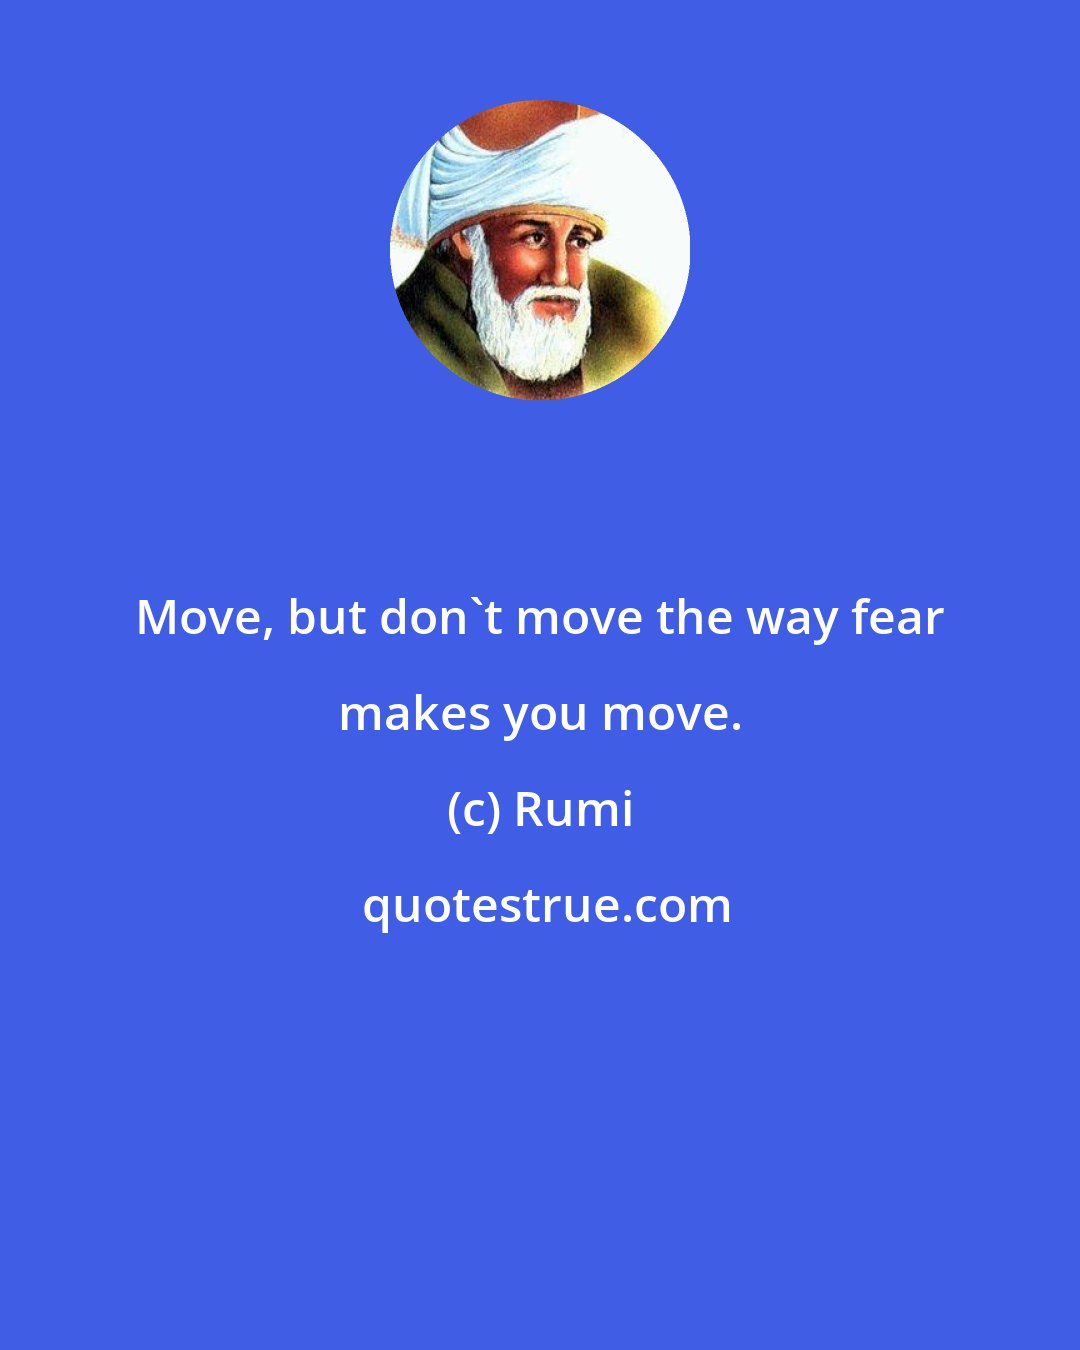 Rumi: Move, but don't move the way fear makes you move.